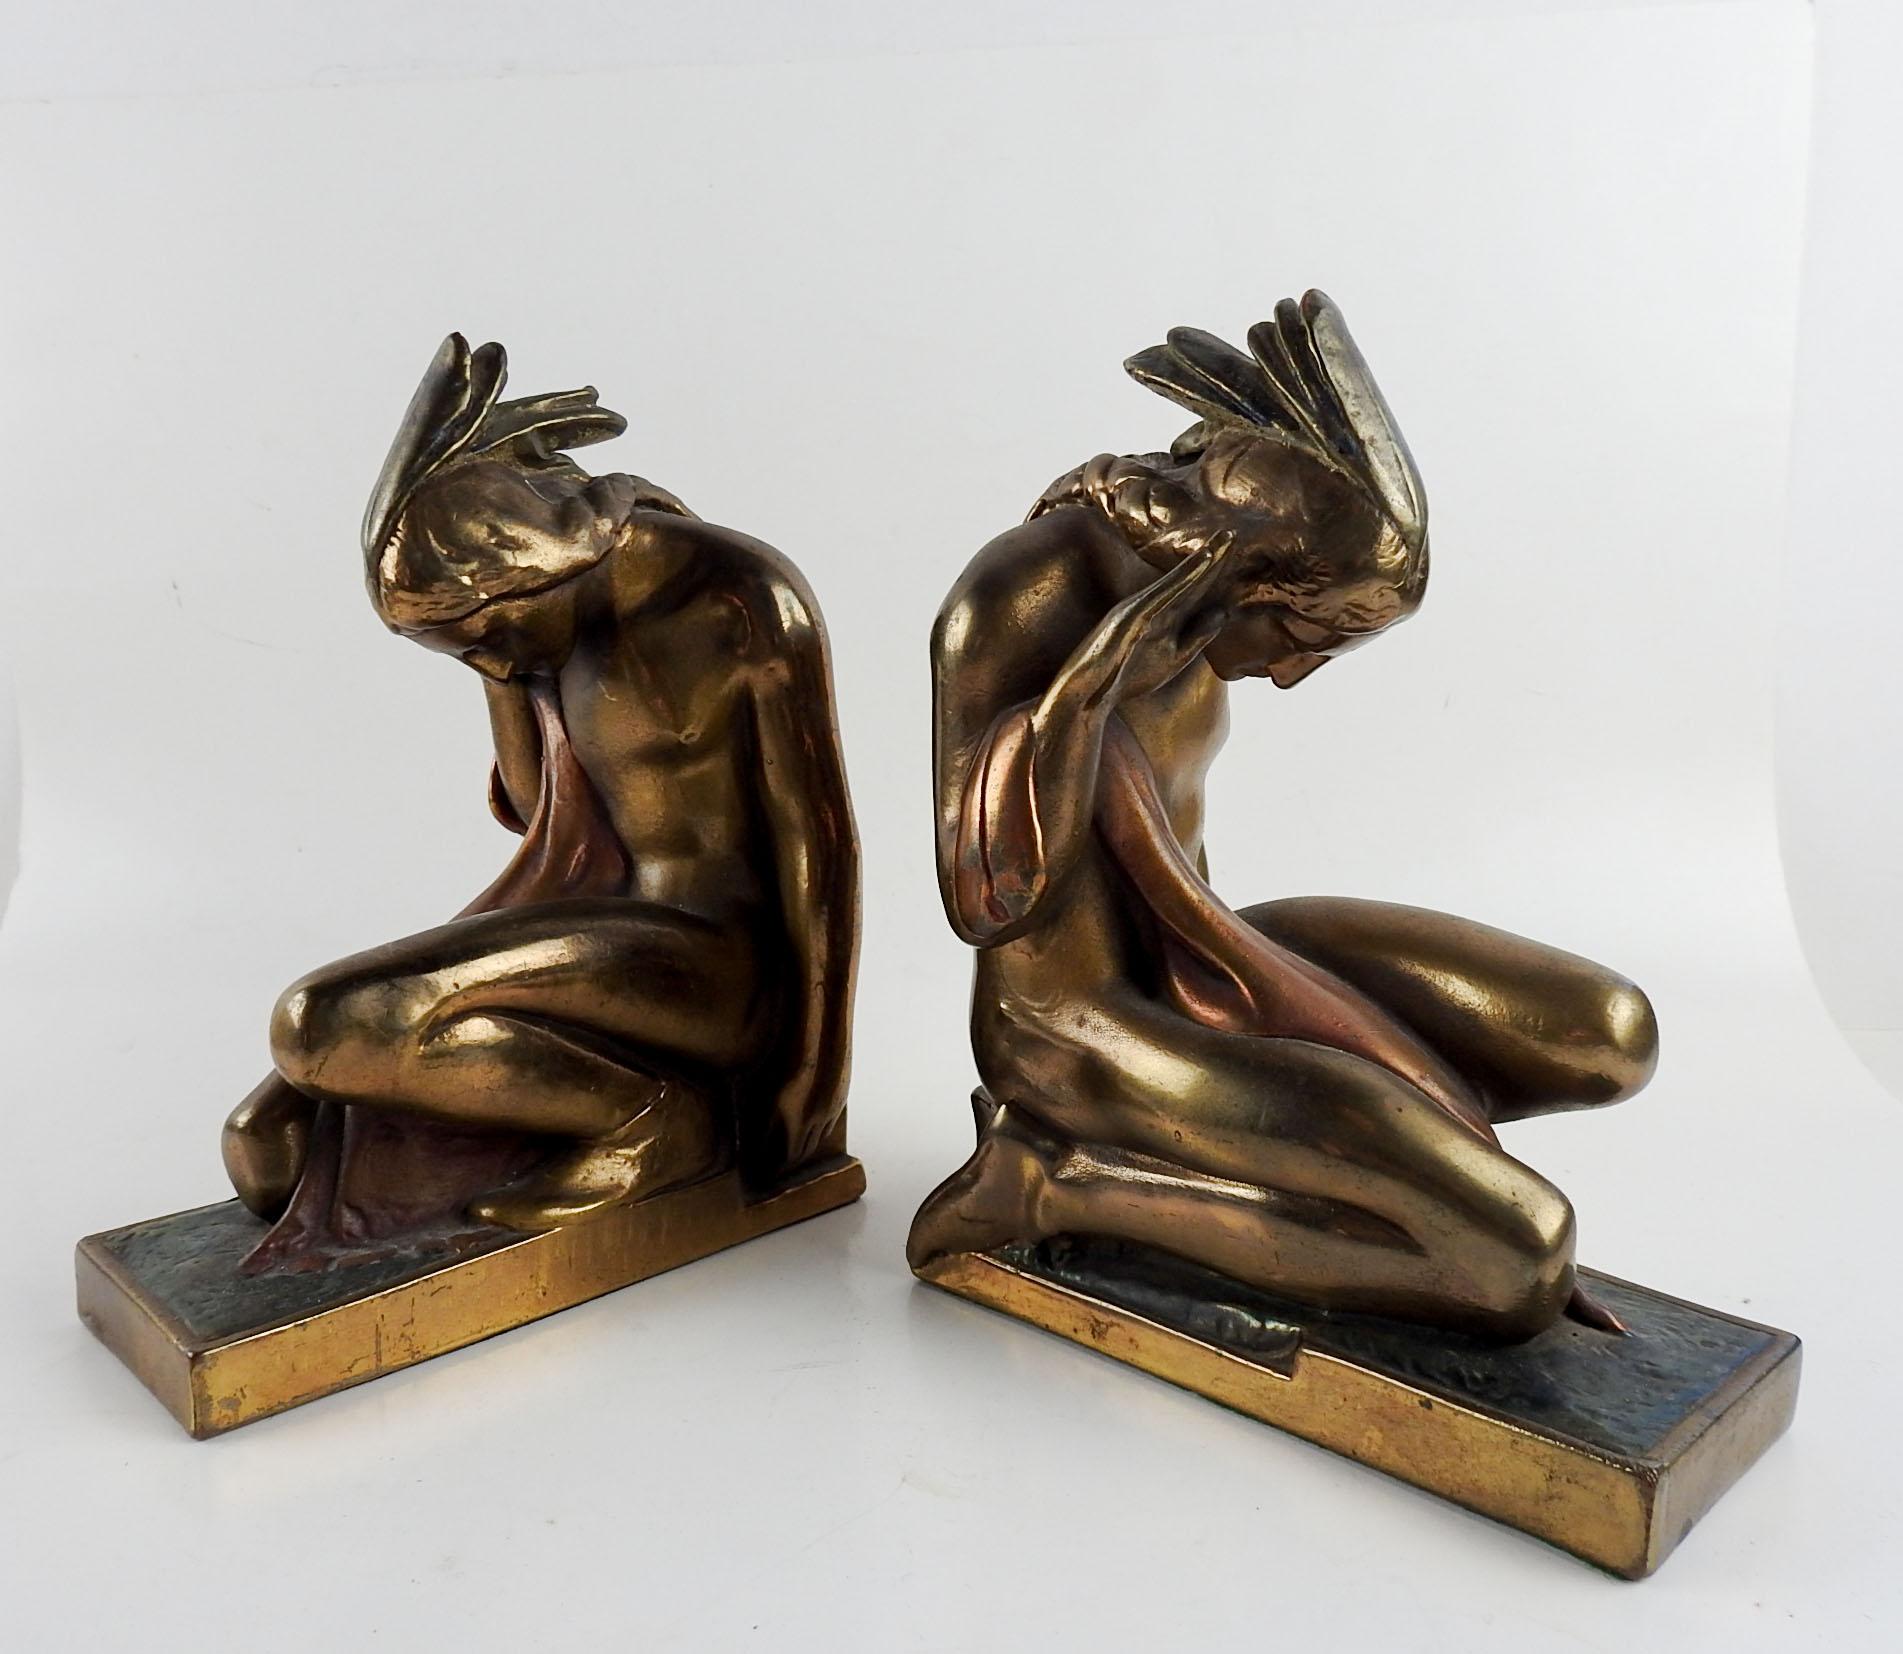 Circa 1920's vintage bronze plated metal bookends. Made by the Pompeian Bronze Company in New York, designed by Paul Herzel, with red coloring to blanket and irridecent blue to base.